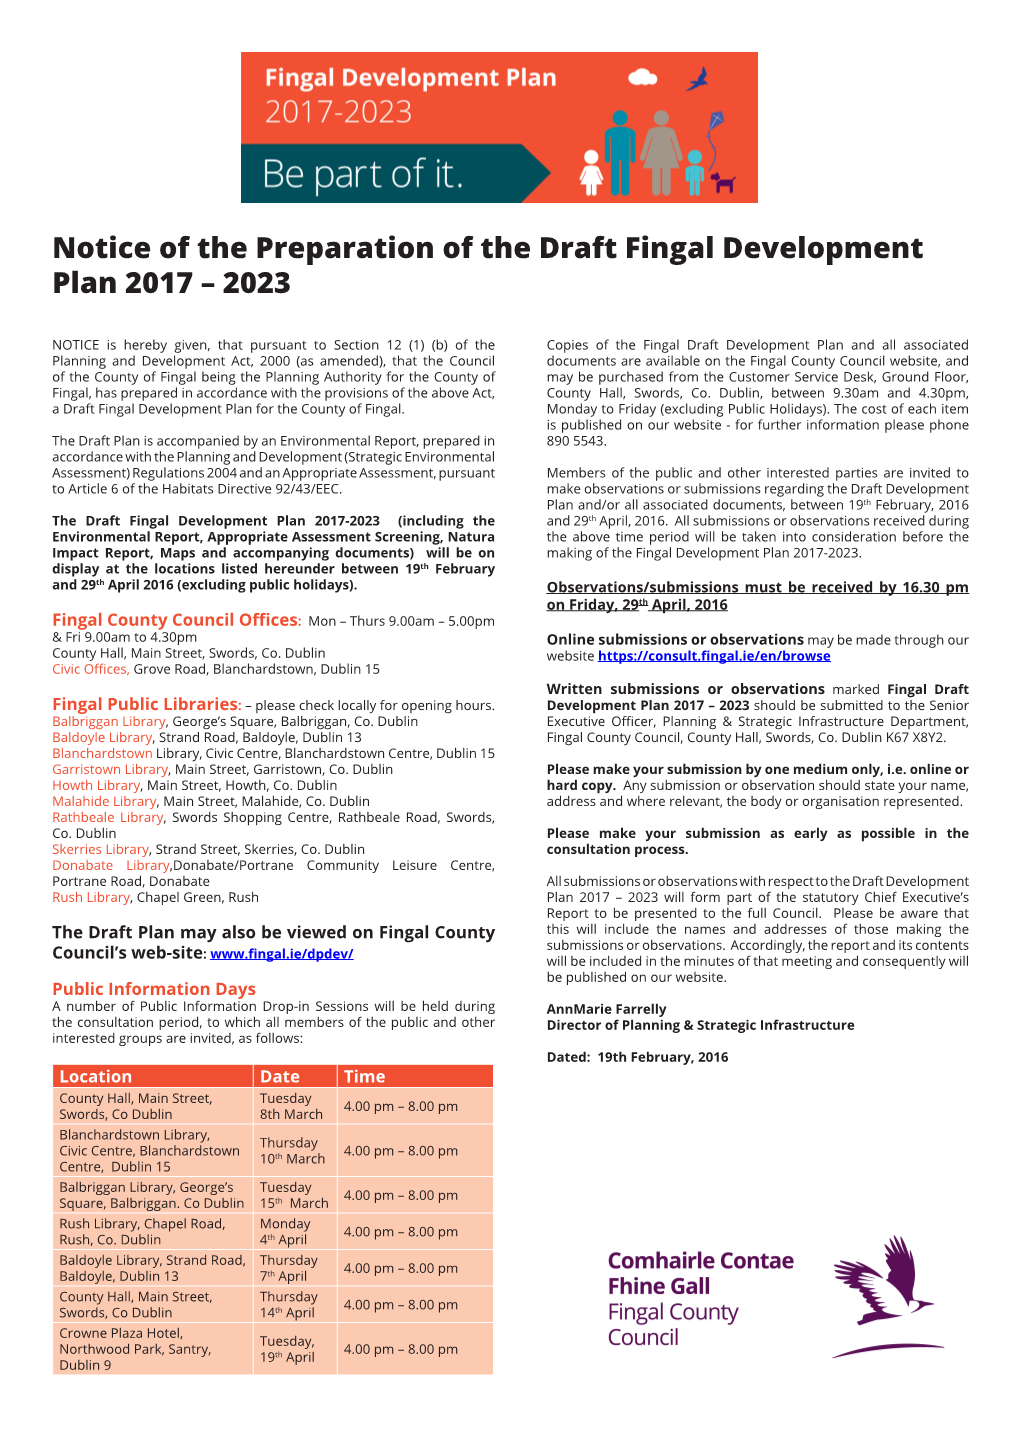 Notice of the Preparation of the Draft Fingal Development Plan 2017 – 2023